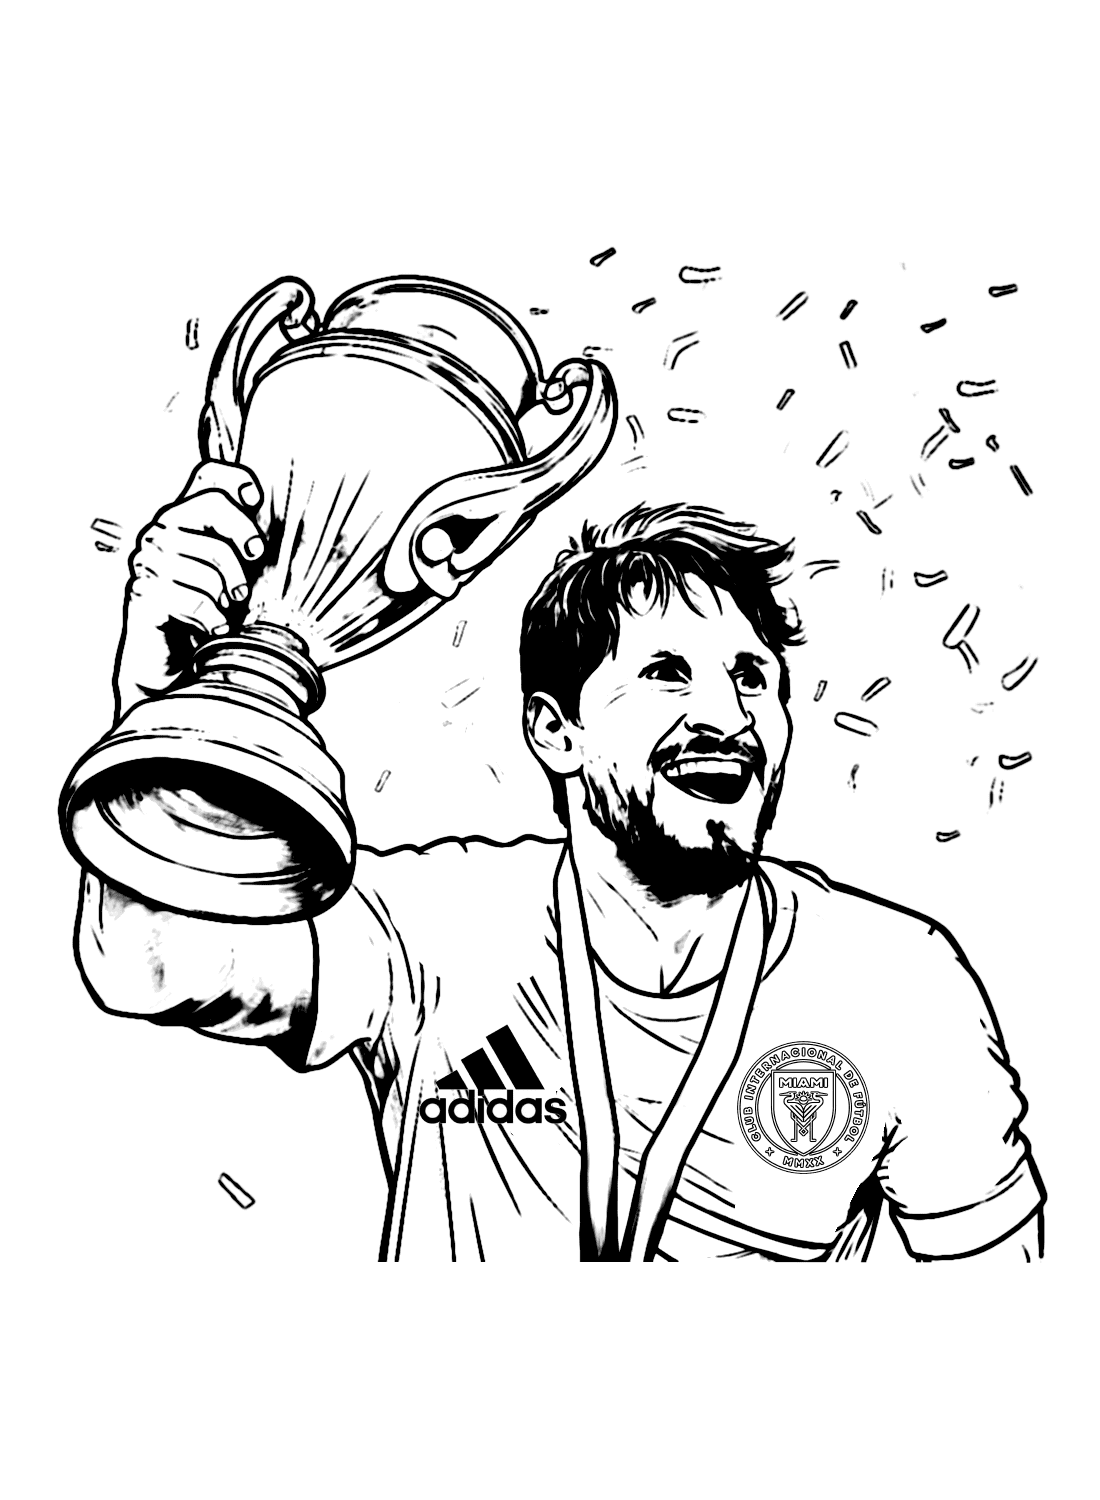 Messi Lifting A Championship Cup Image For Kids